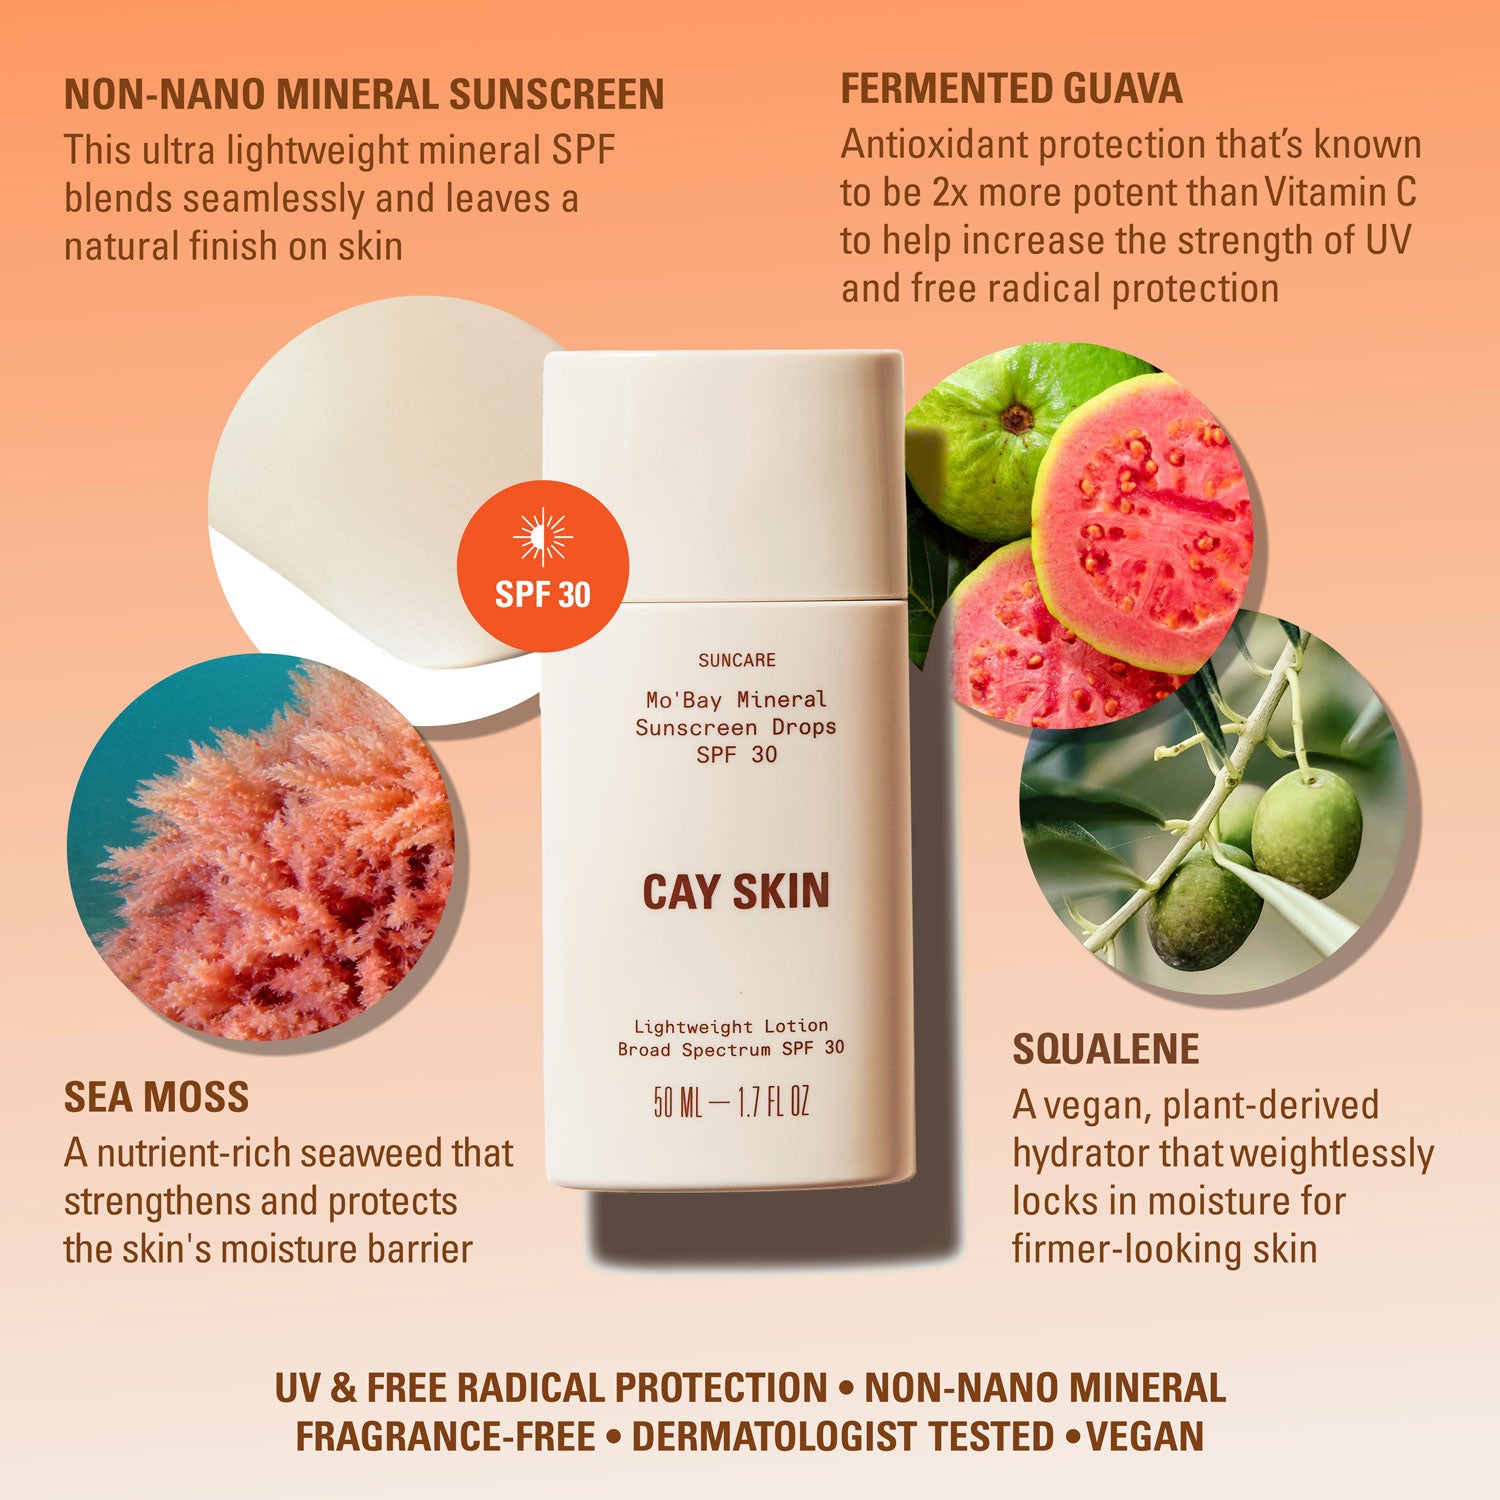 Infographic for Cay Skin Mo’Bay Mineral Sheer-Melt Sunscreen Drops SPF 30